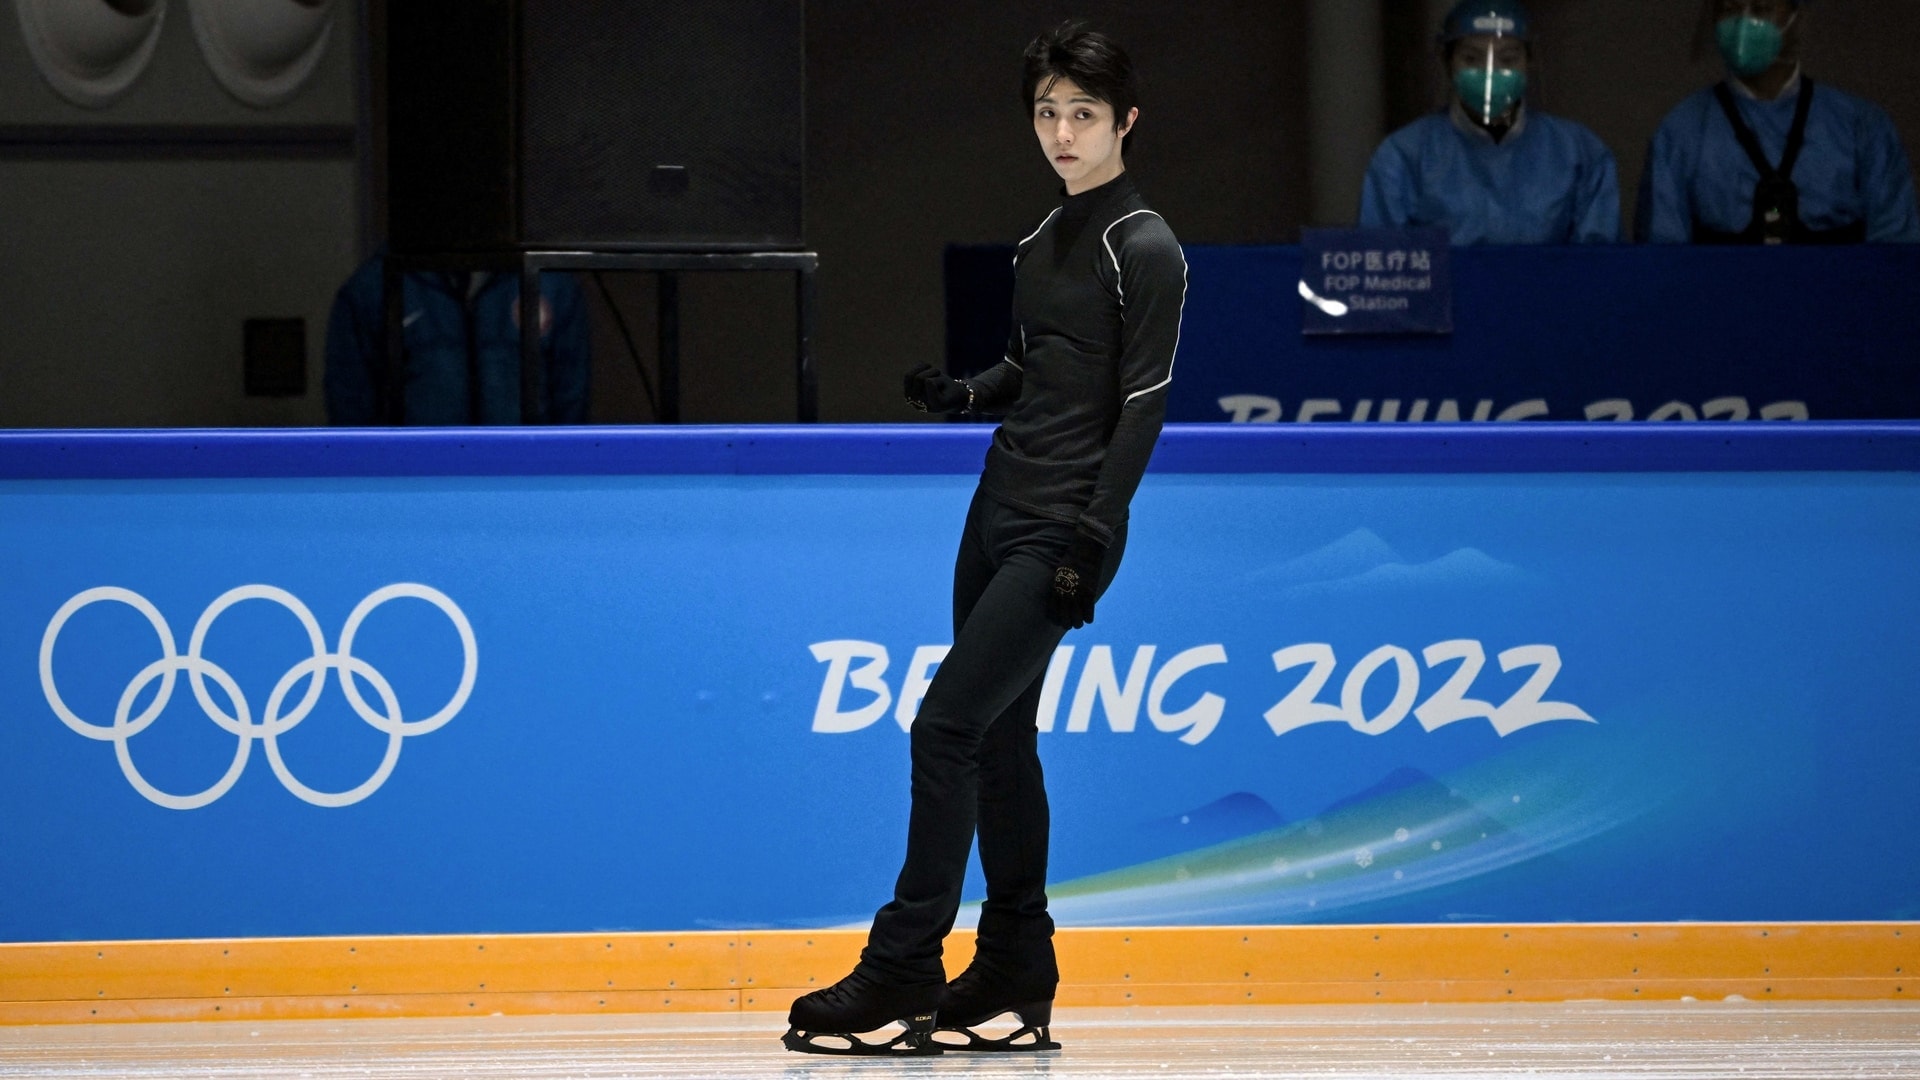 He does exist! Watch Hanyu at Olympic practice session